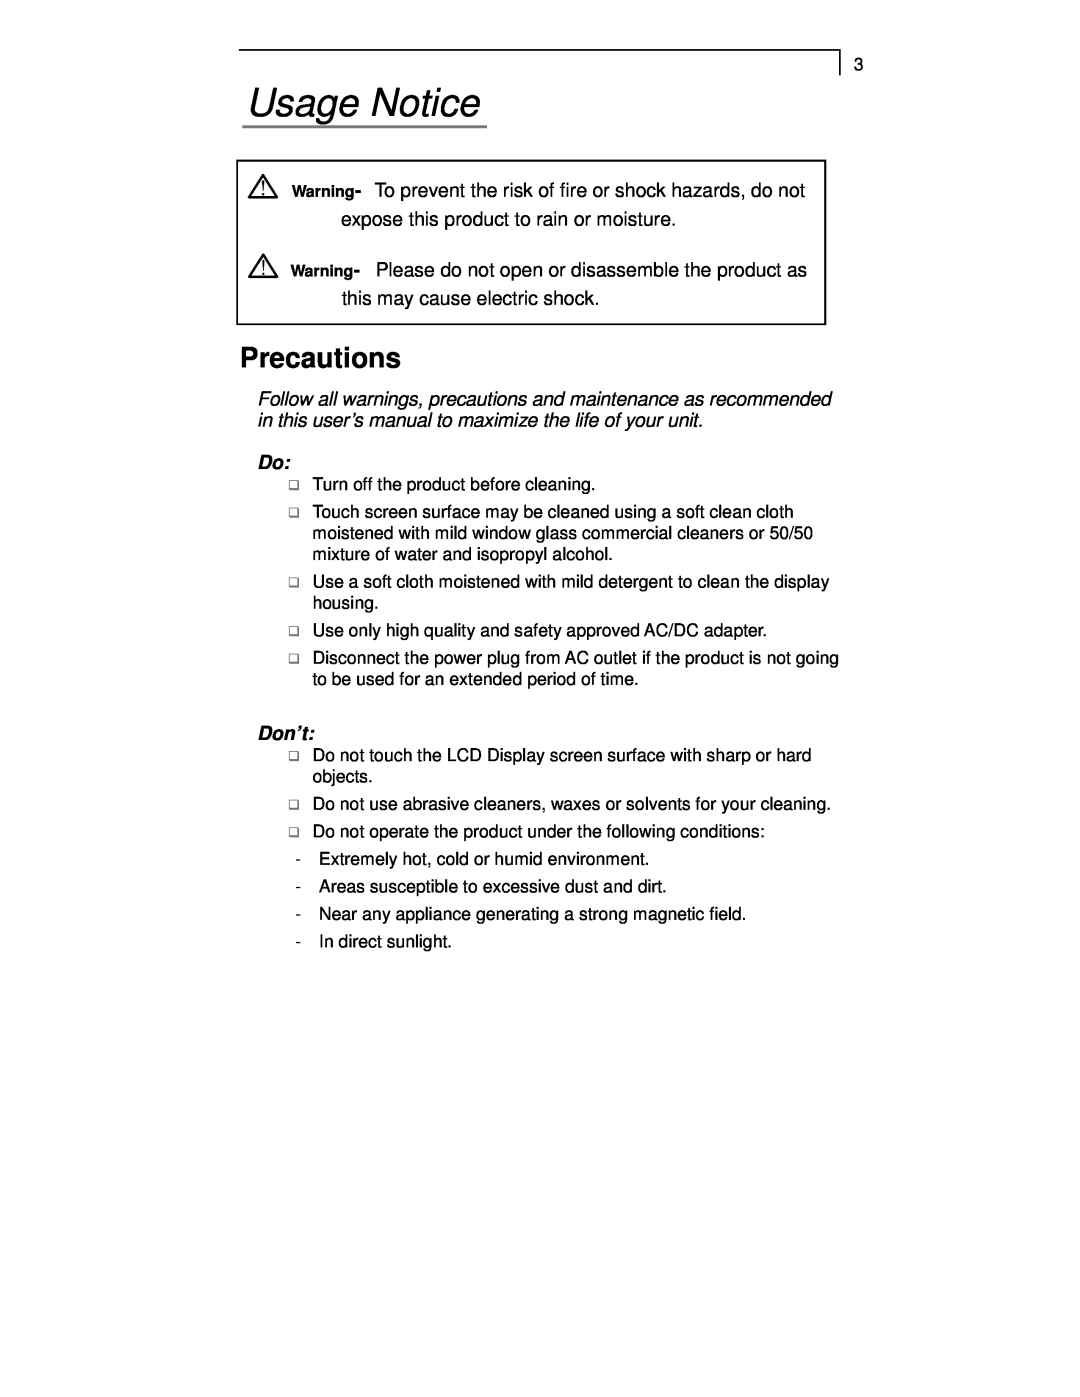 Planar PT1911MX manual Usage Notice, Precautions, Warning- To prevent the risk of fire or shock hazards, do not, Don’t 